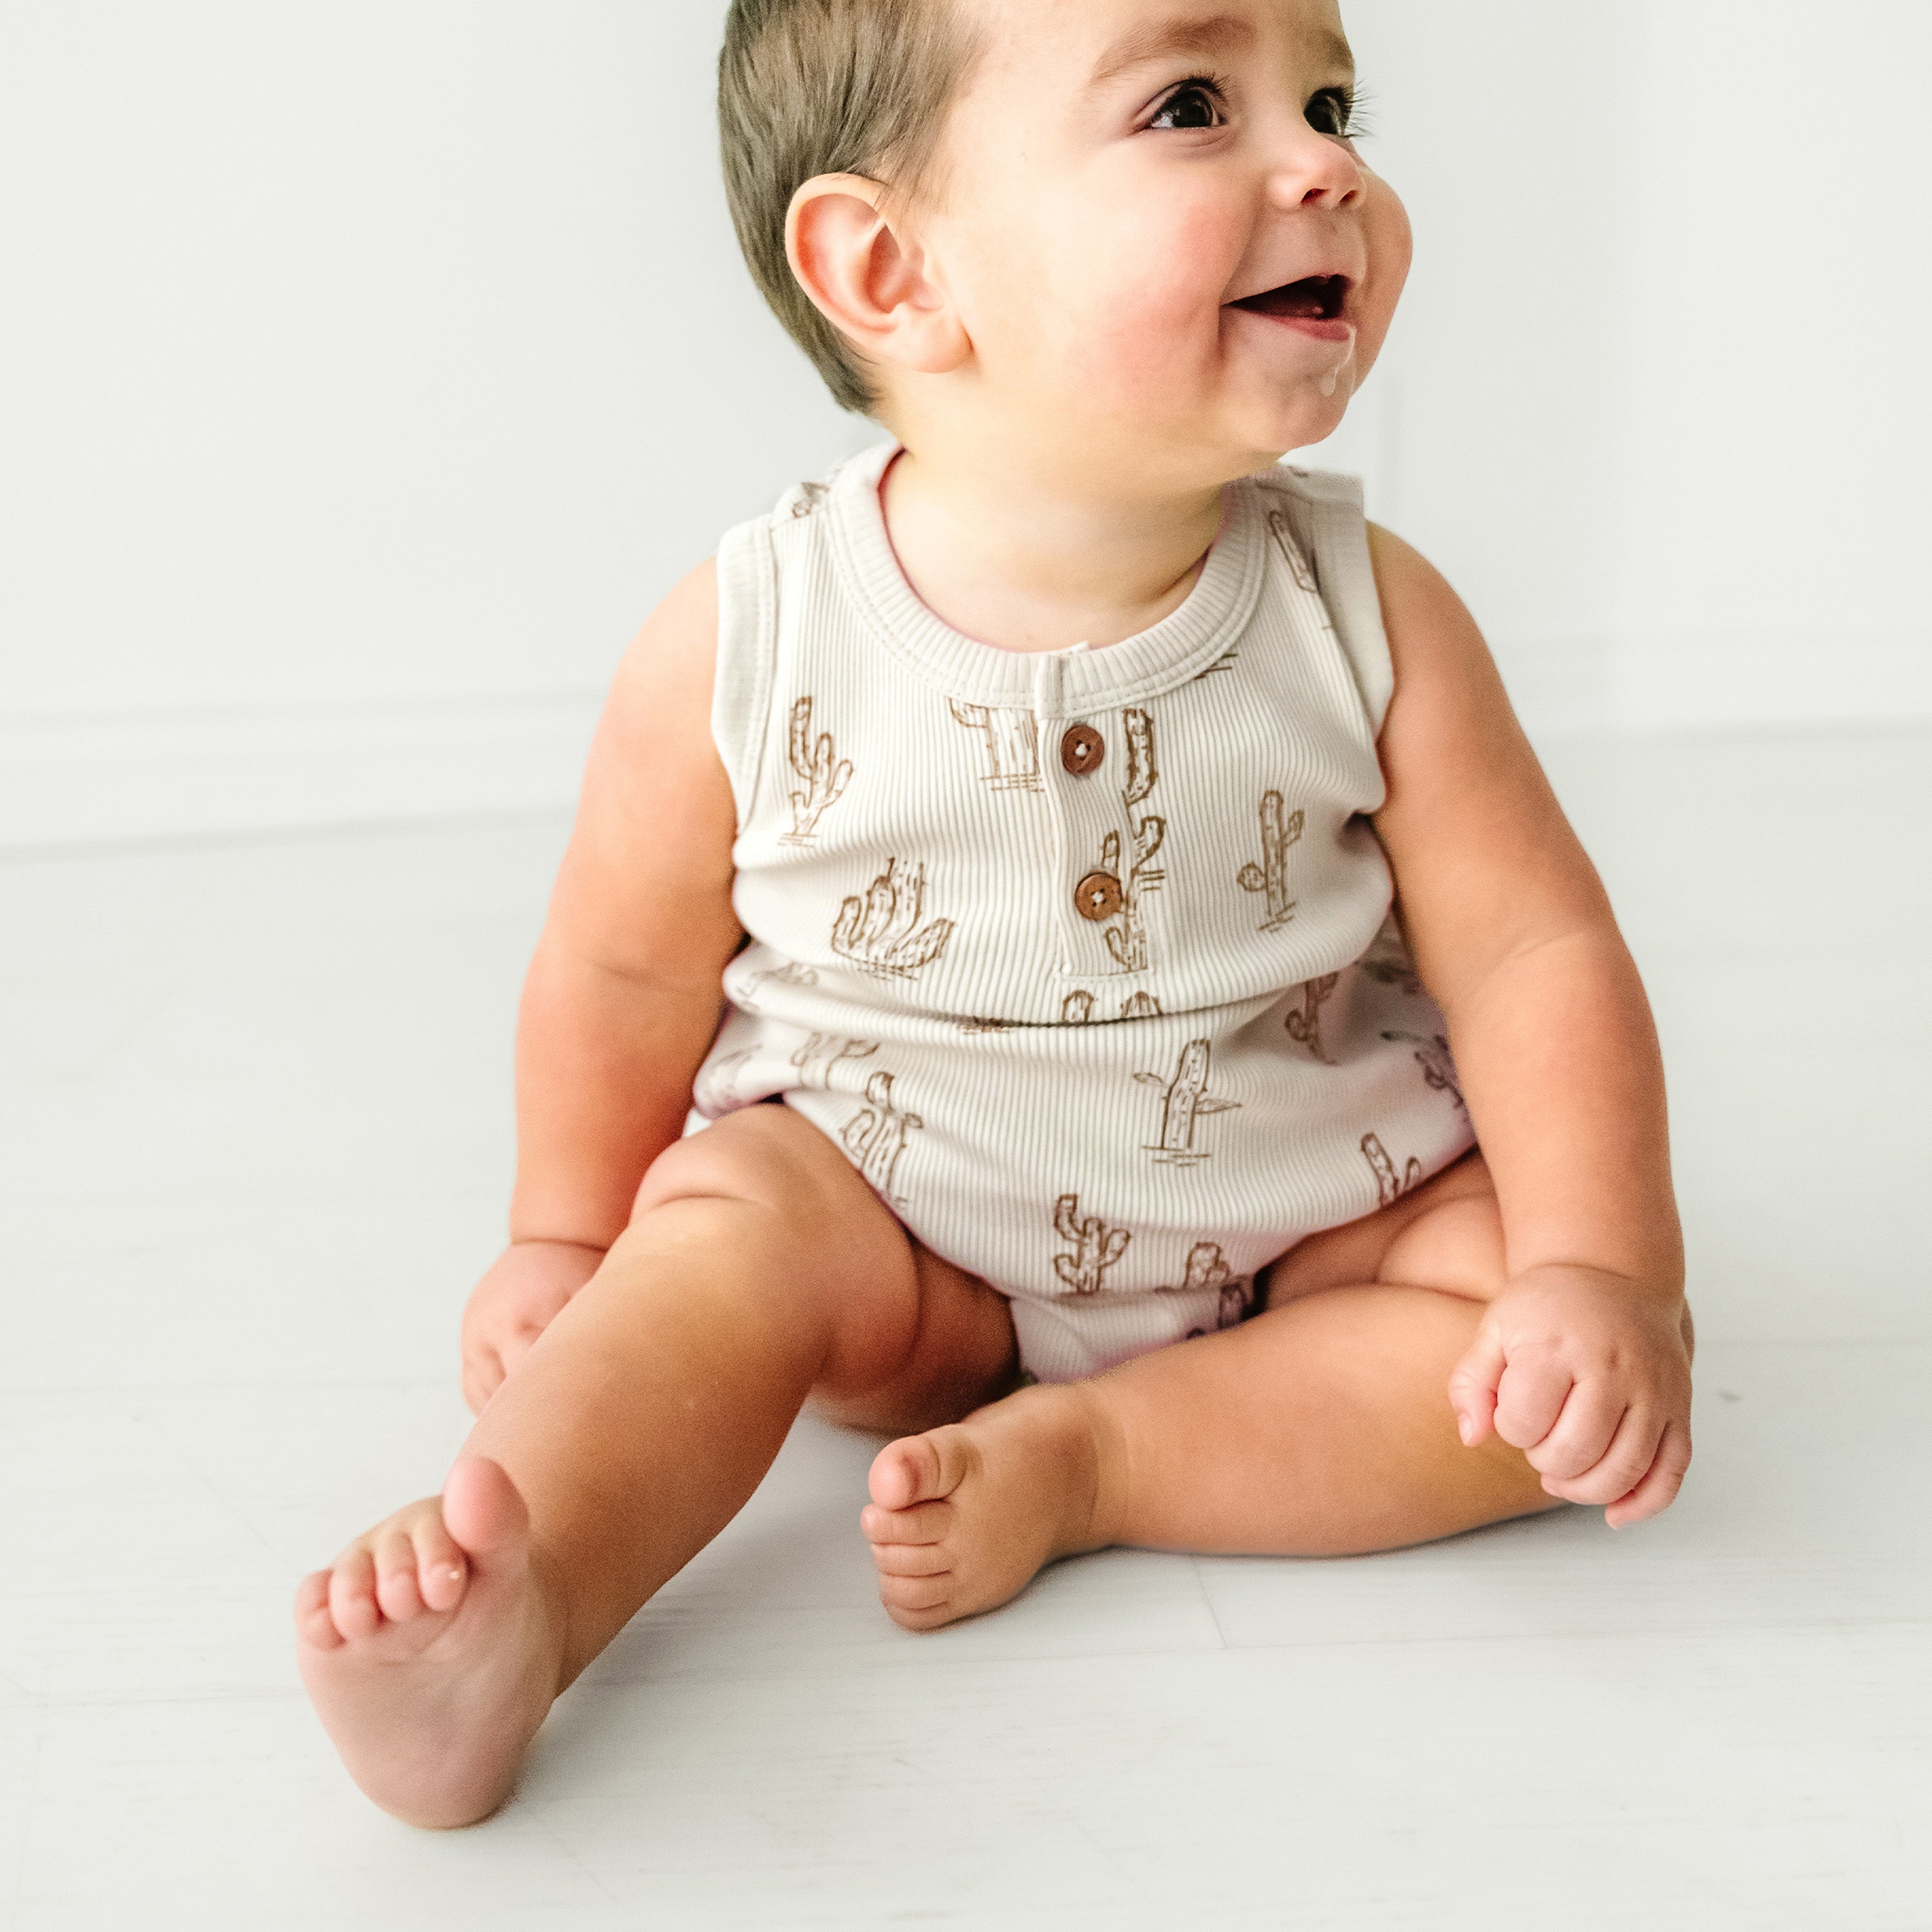 A joyful toddler in a Makemake Organics Organic Bubble Onesie - Cactus sits on a white floor, looking up and to the left with a big smile.